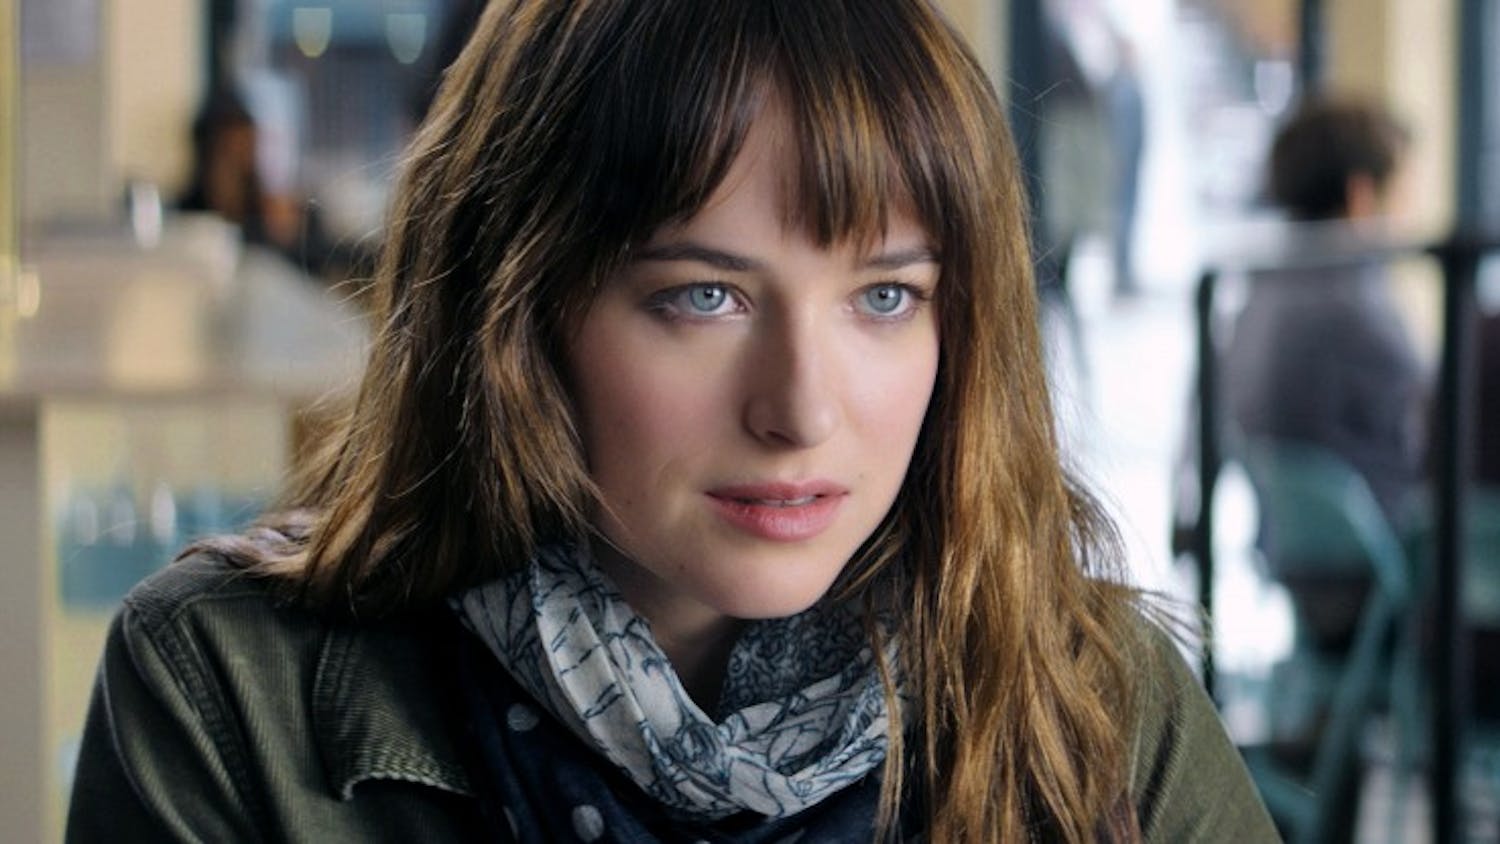 ENTER FIFTYSHADES-MOVIE-REVIEW 3 MCT